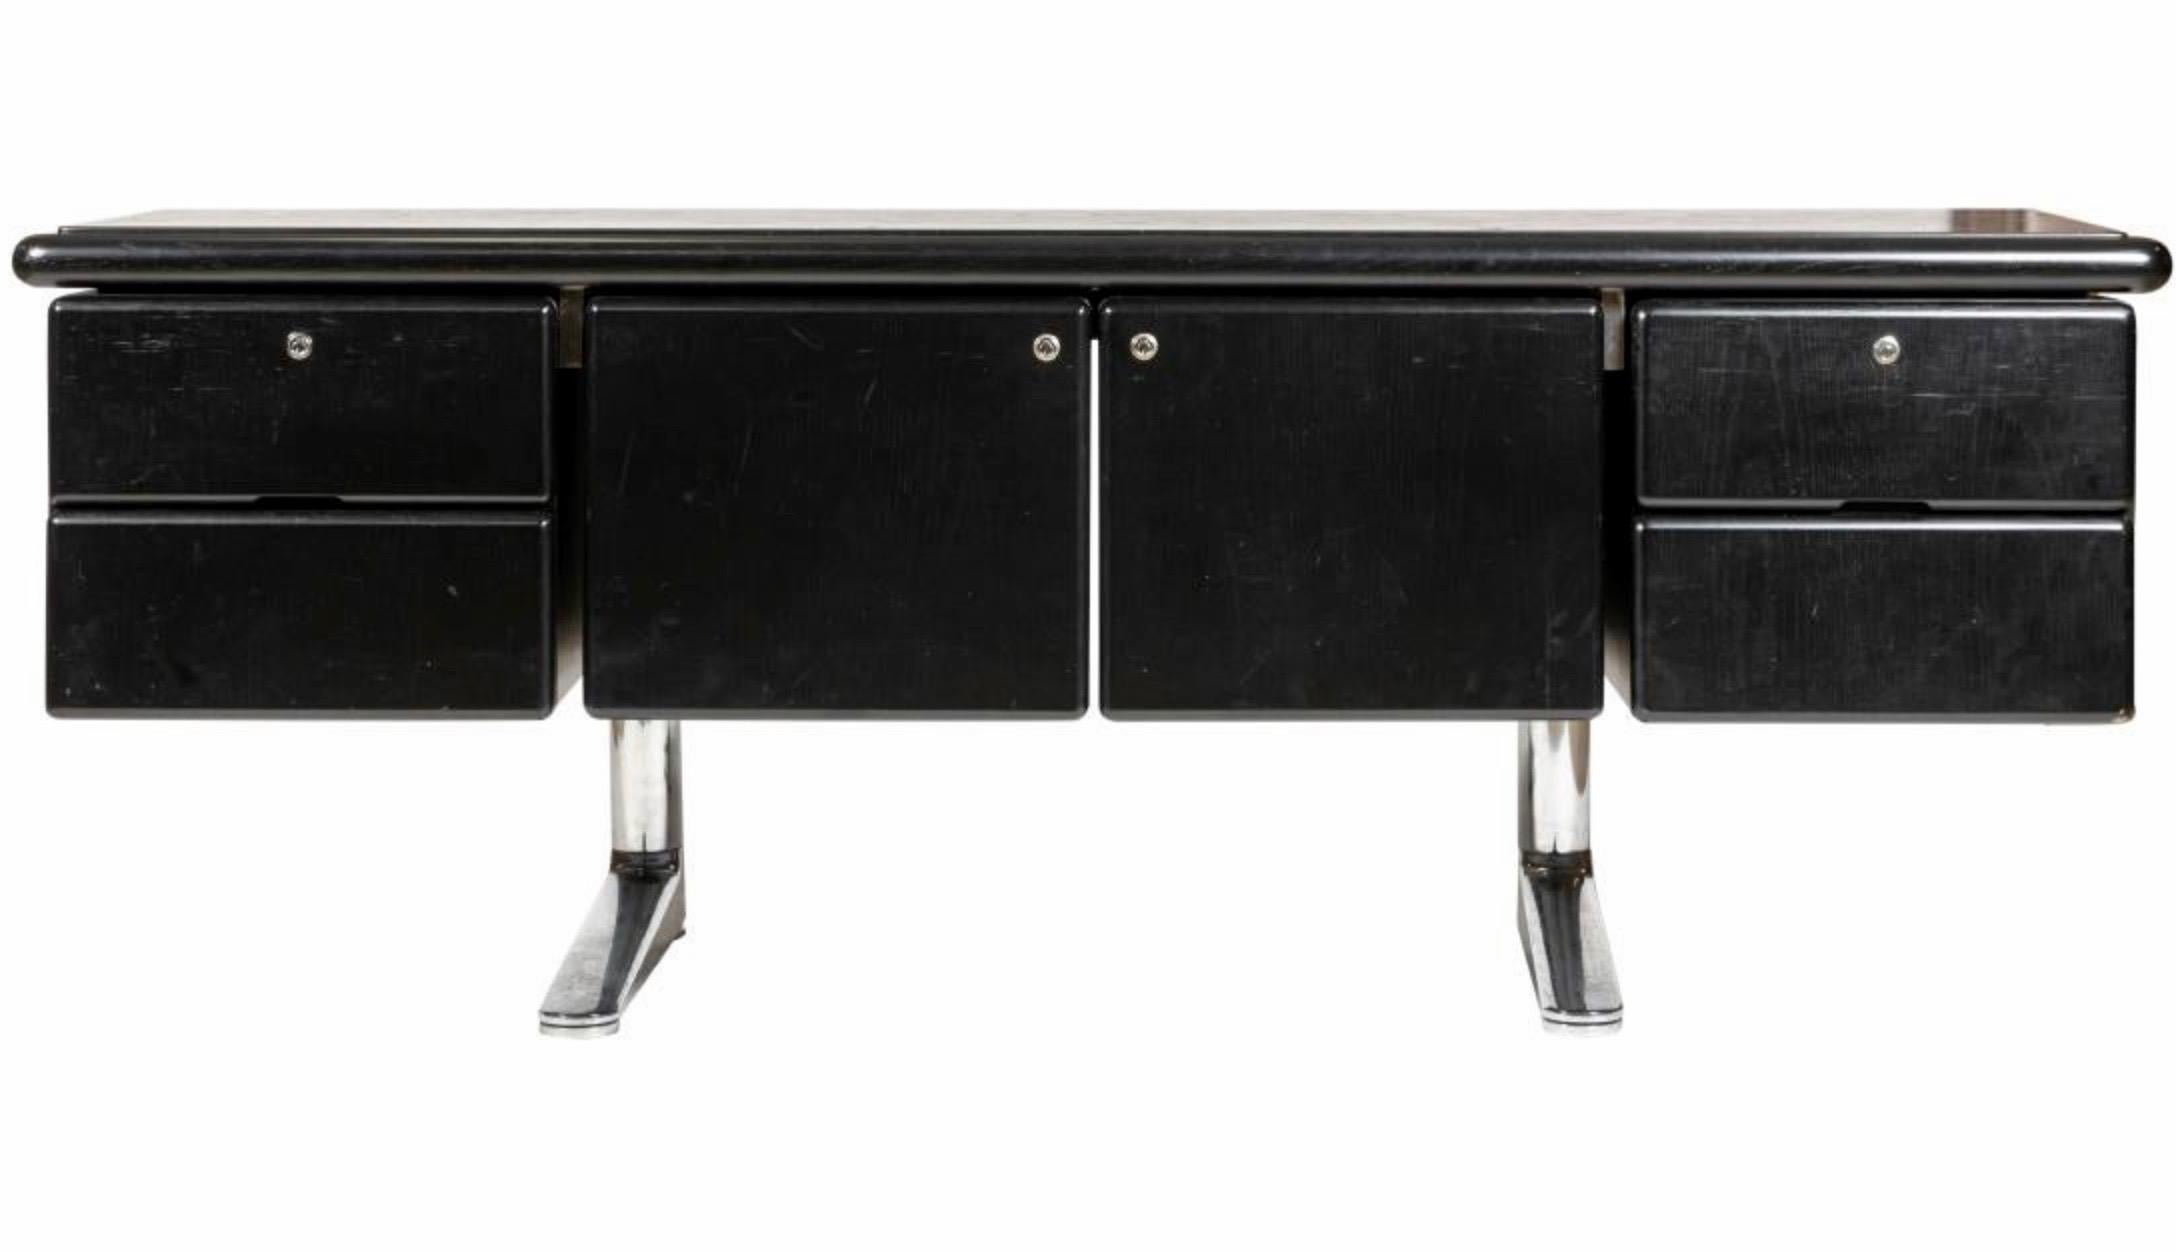 Handsome black oak sideboard designed by Warren Planter and manufactured by Knoll International, in 1973. Entire piece rests on top of two cantilevered chrome legs. 2 drawers flank each side of the sideboard with a cupboard in the middle. Entire